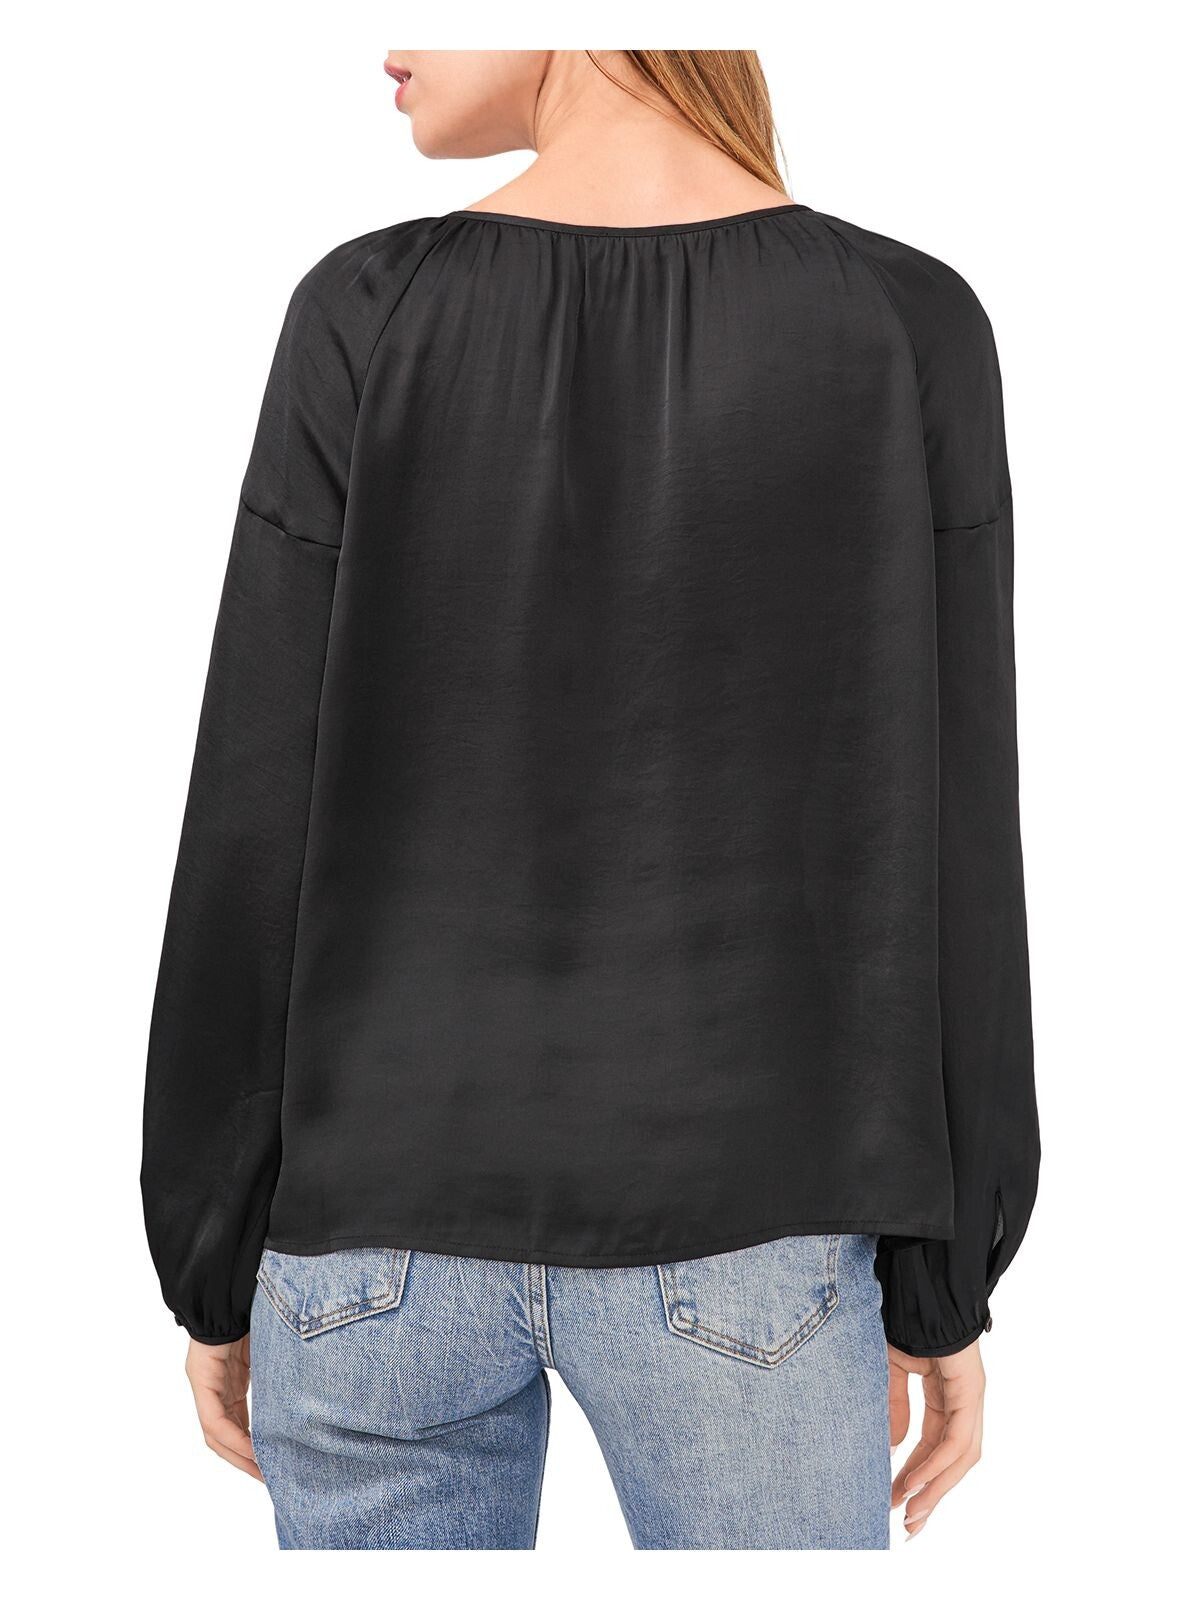 VINCE CAMUTO Womens Black Gathered Curved Hem Long Sleeve Keyhole Wear To Work Peasant Top XS